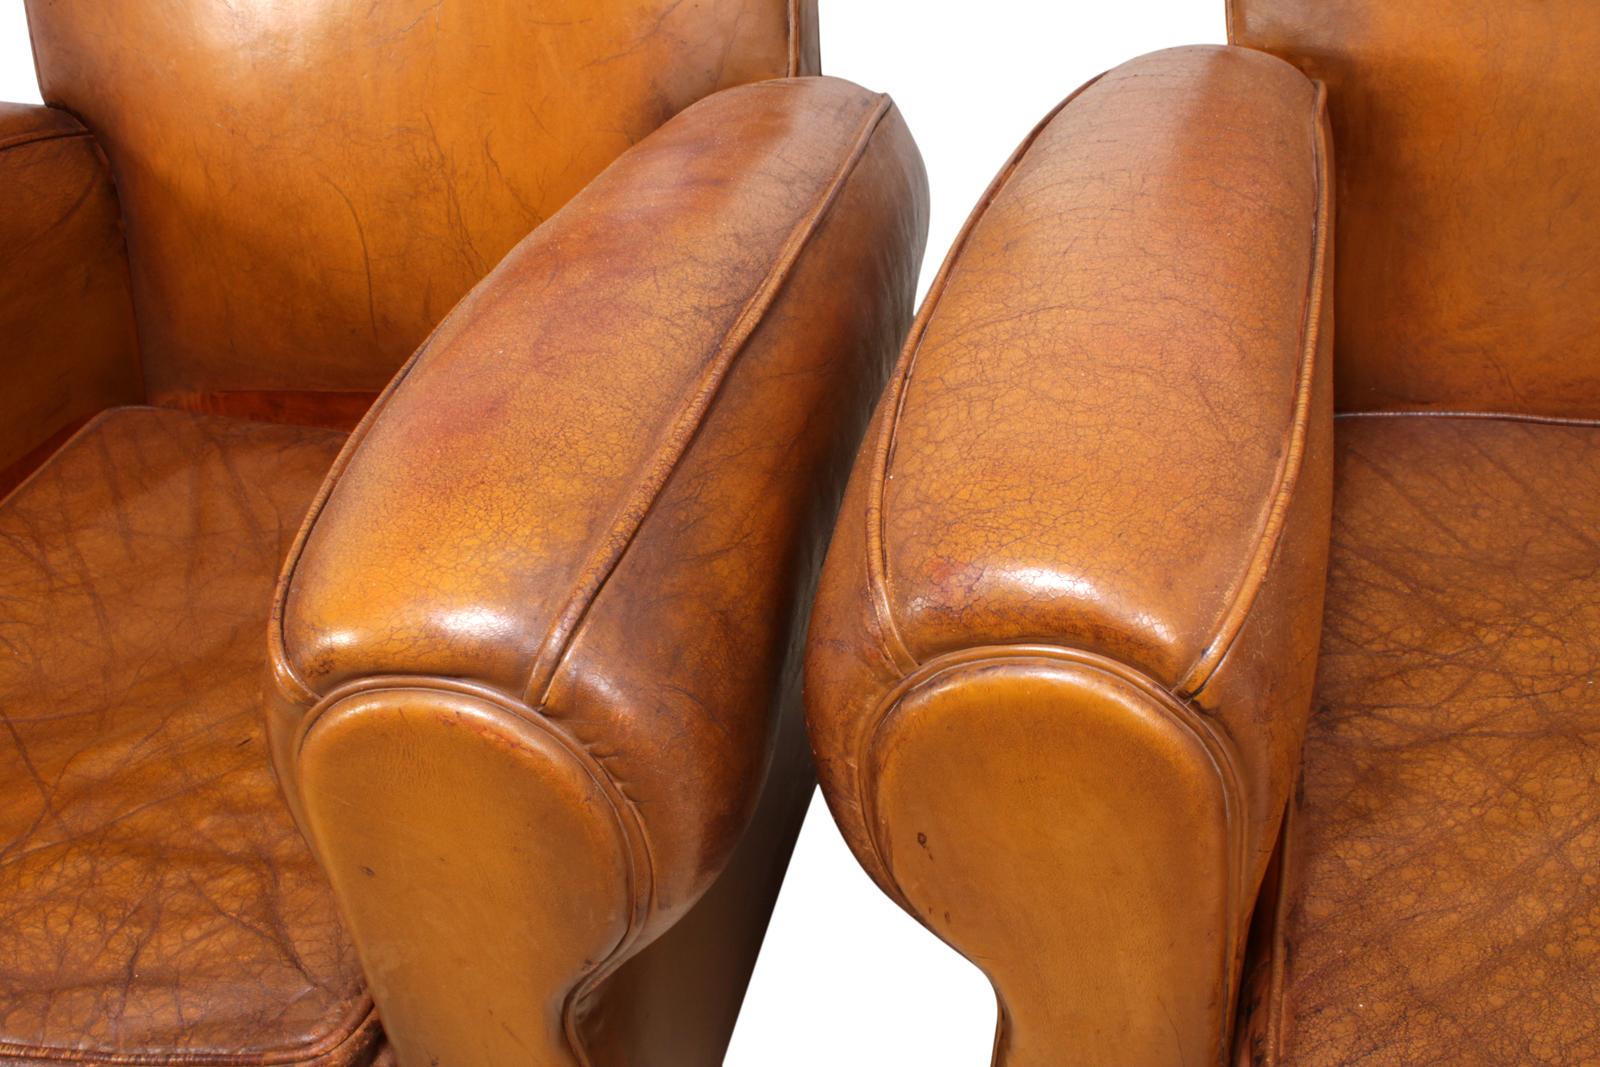 Pair of French leather club chairs, circa 1940.
This pair of leather club chairs are in good condition for there age we have conditioned and fed the leather to enhance its durability and strength, they are coil sprung on a solid hardwood